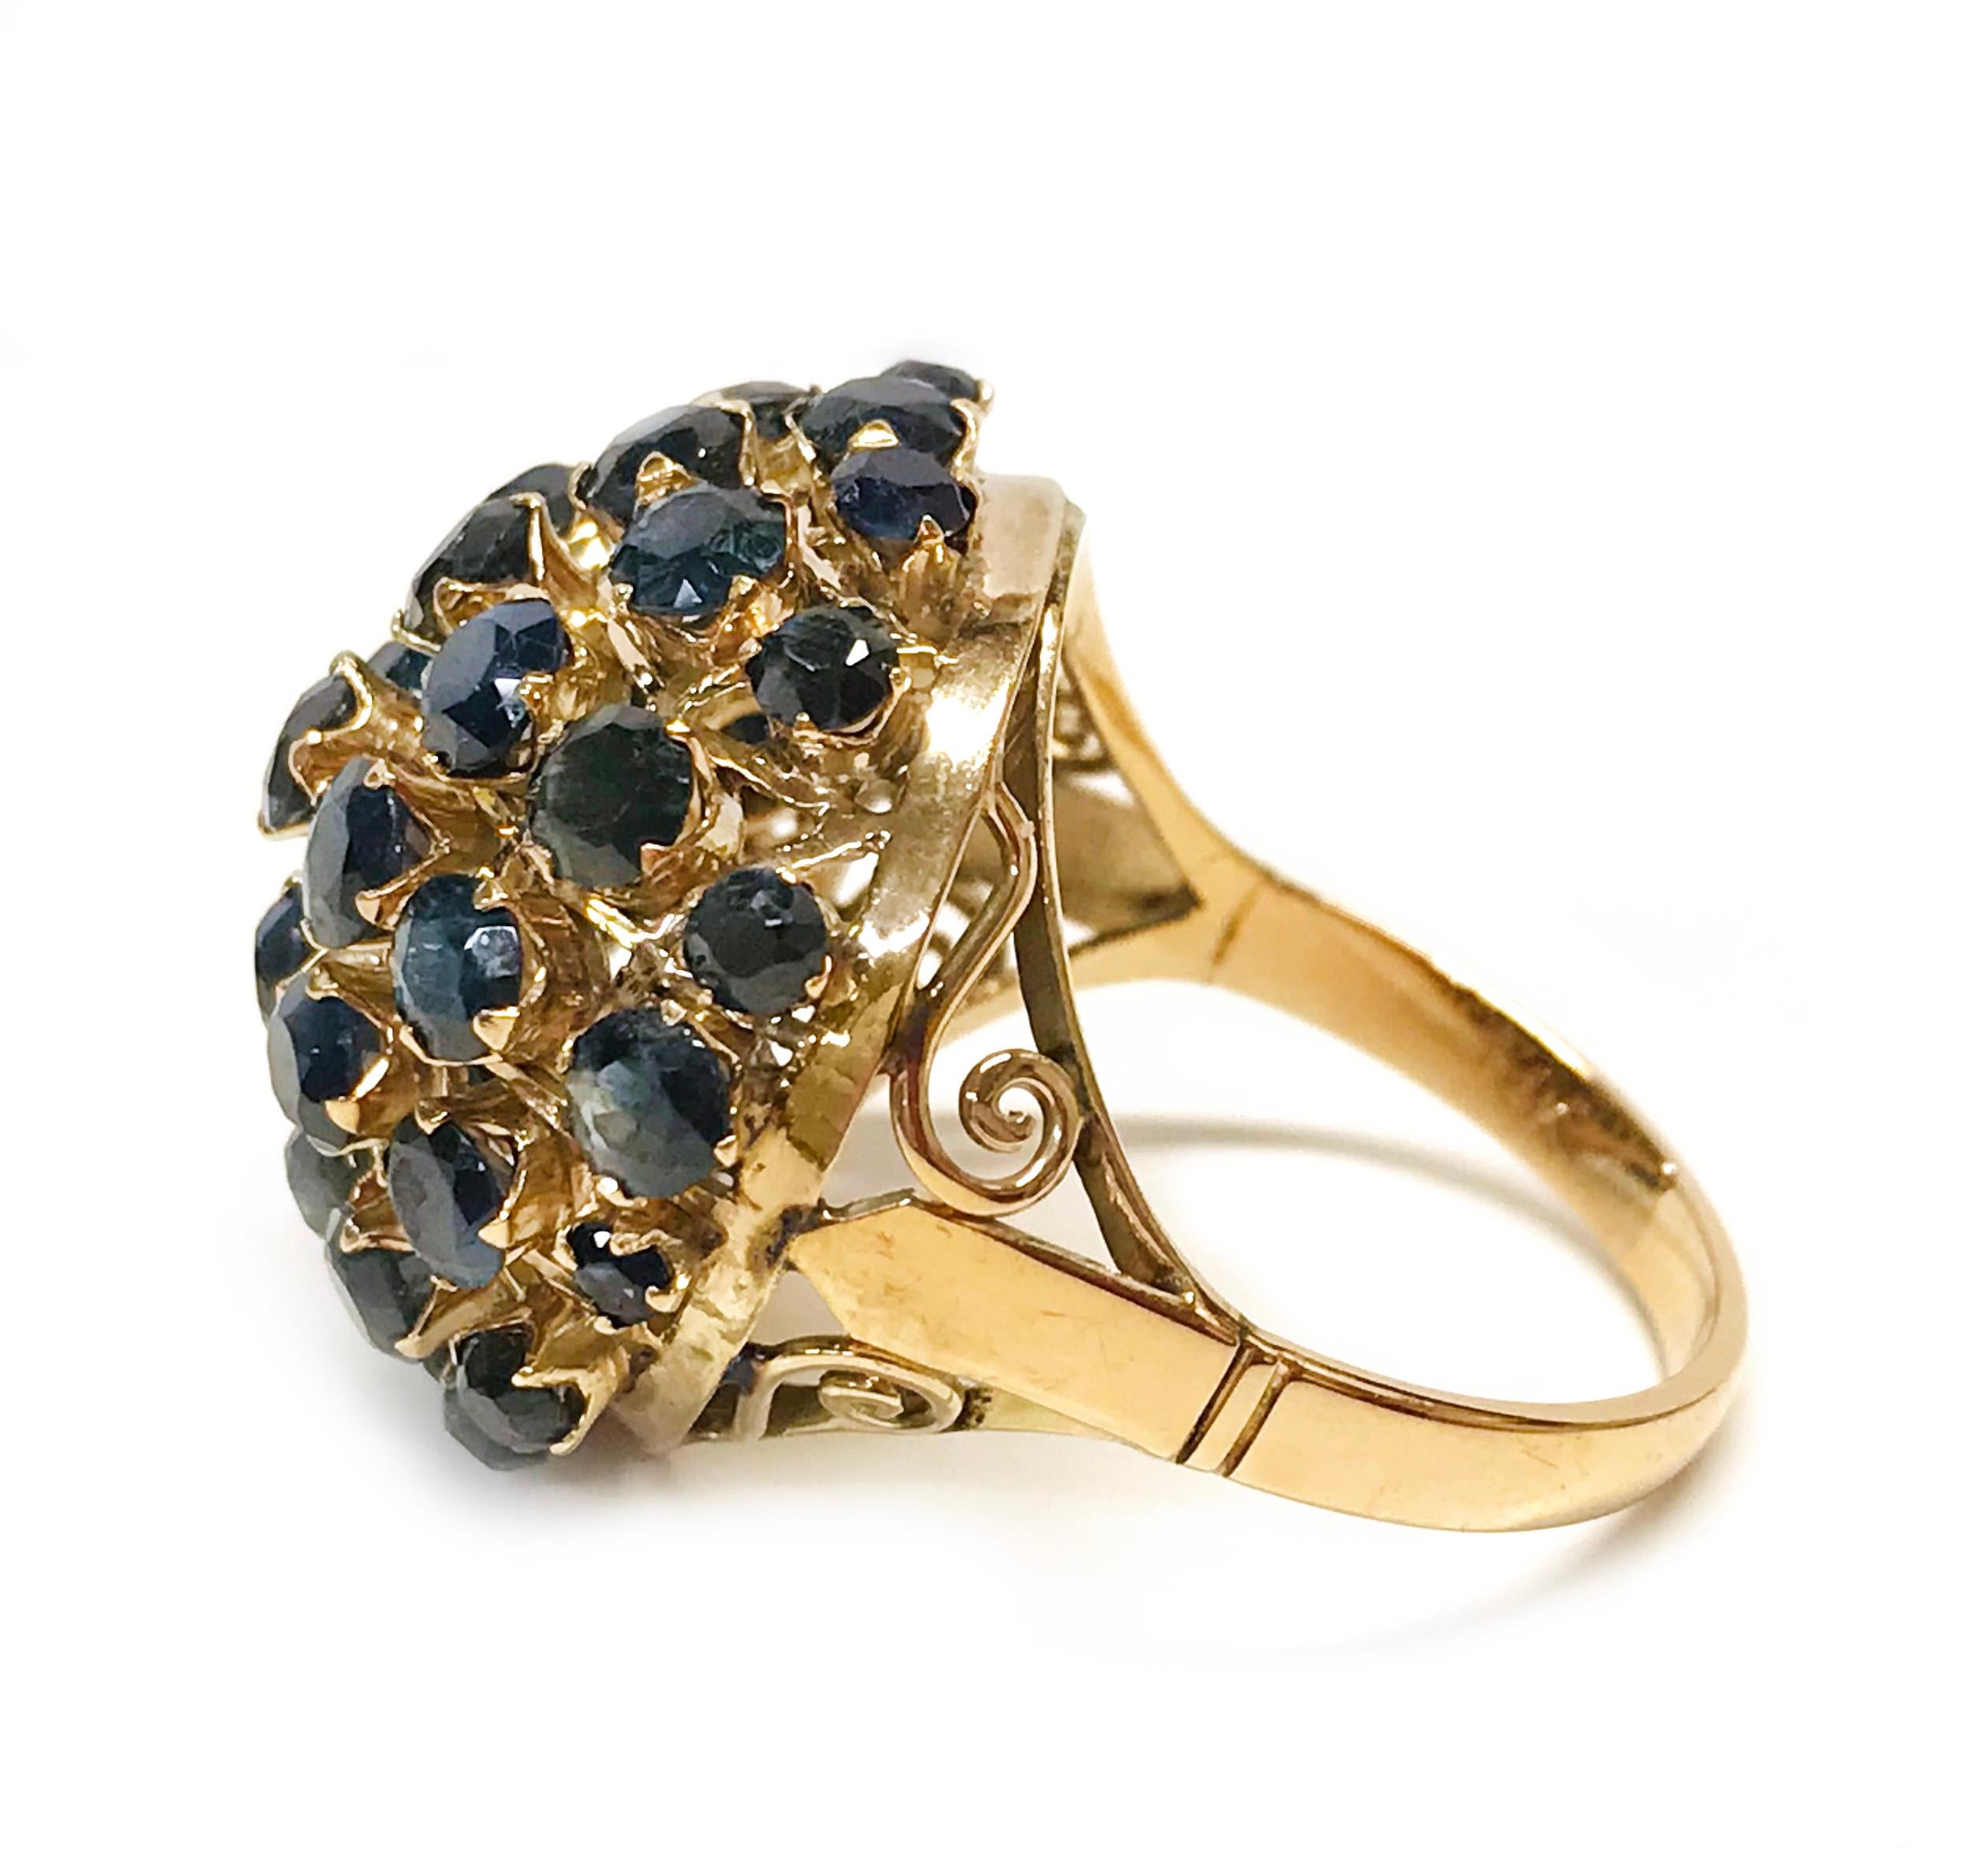 14 Karat Rose Gold Natural Blue Sapphire Dome Ring. A beautiful dome design with thirty-seven graduate prong-set round dark blue sapphires. The sapphire's total carat weight sapphires are 3.70ctw. The sides of the band have a scroll detail adding